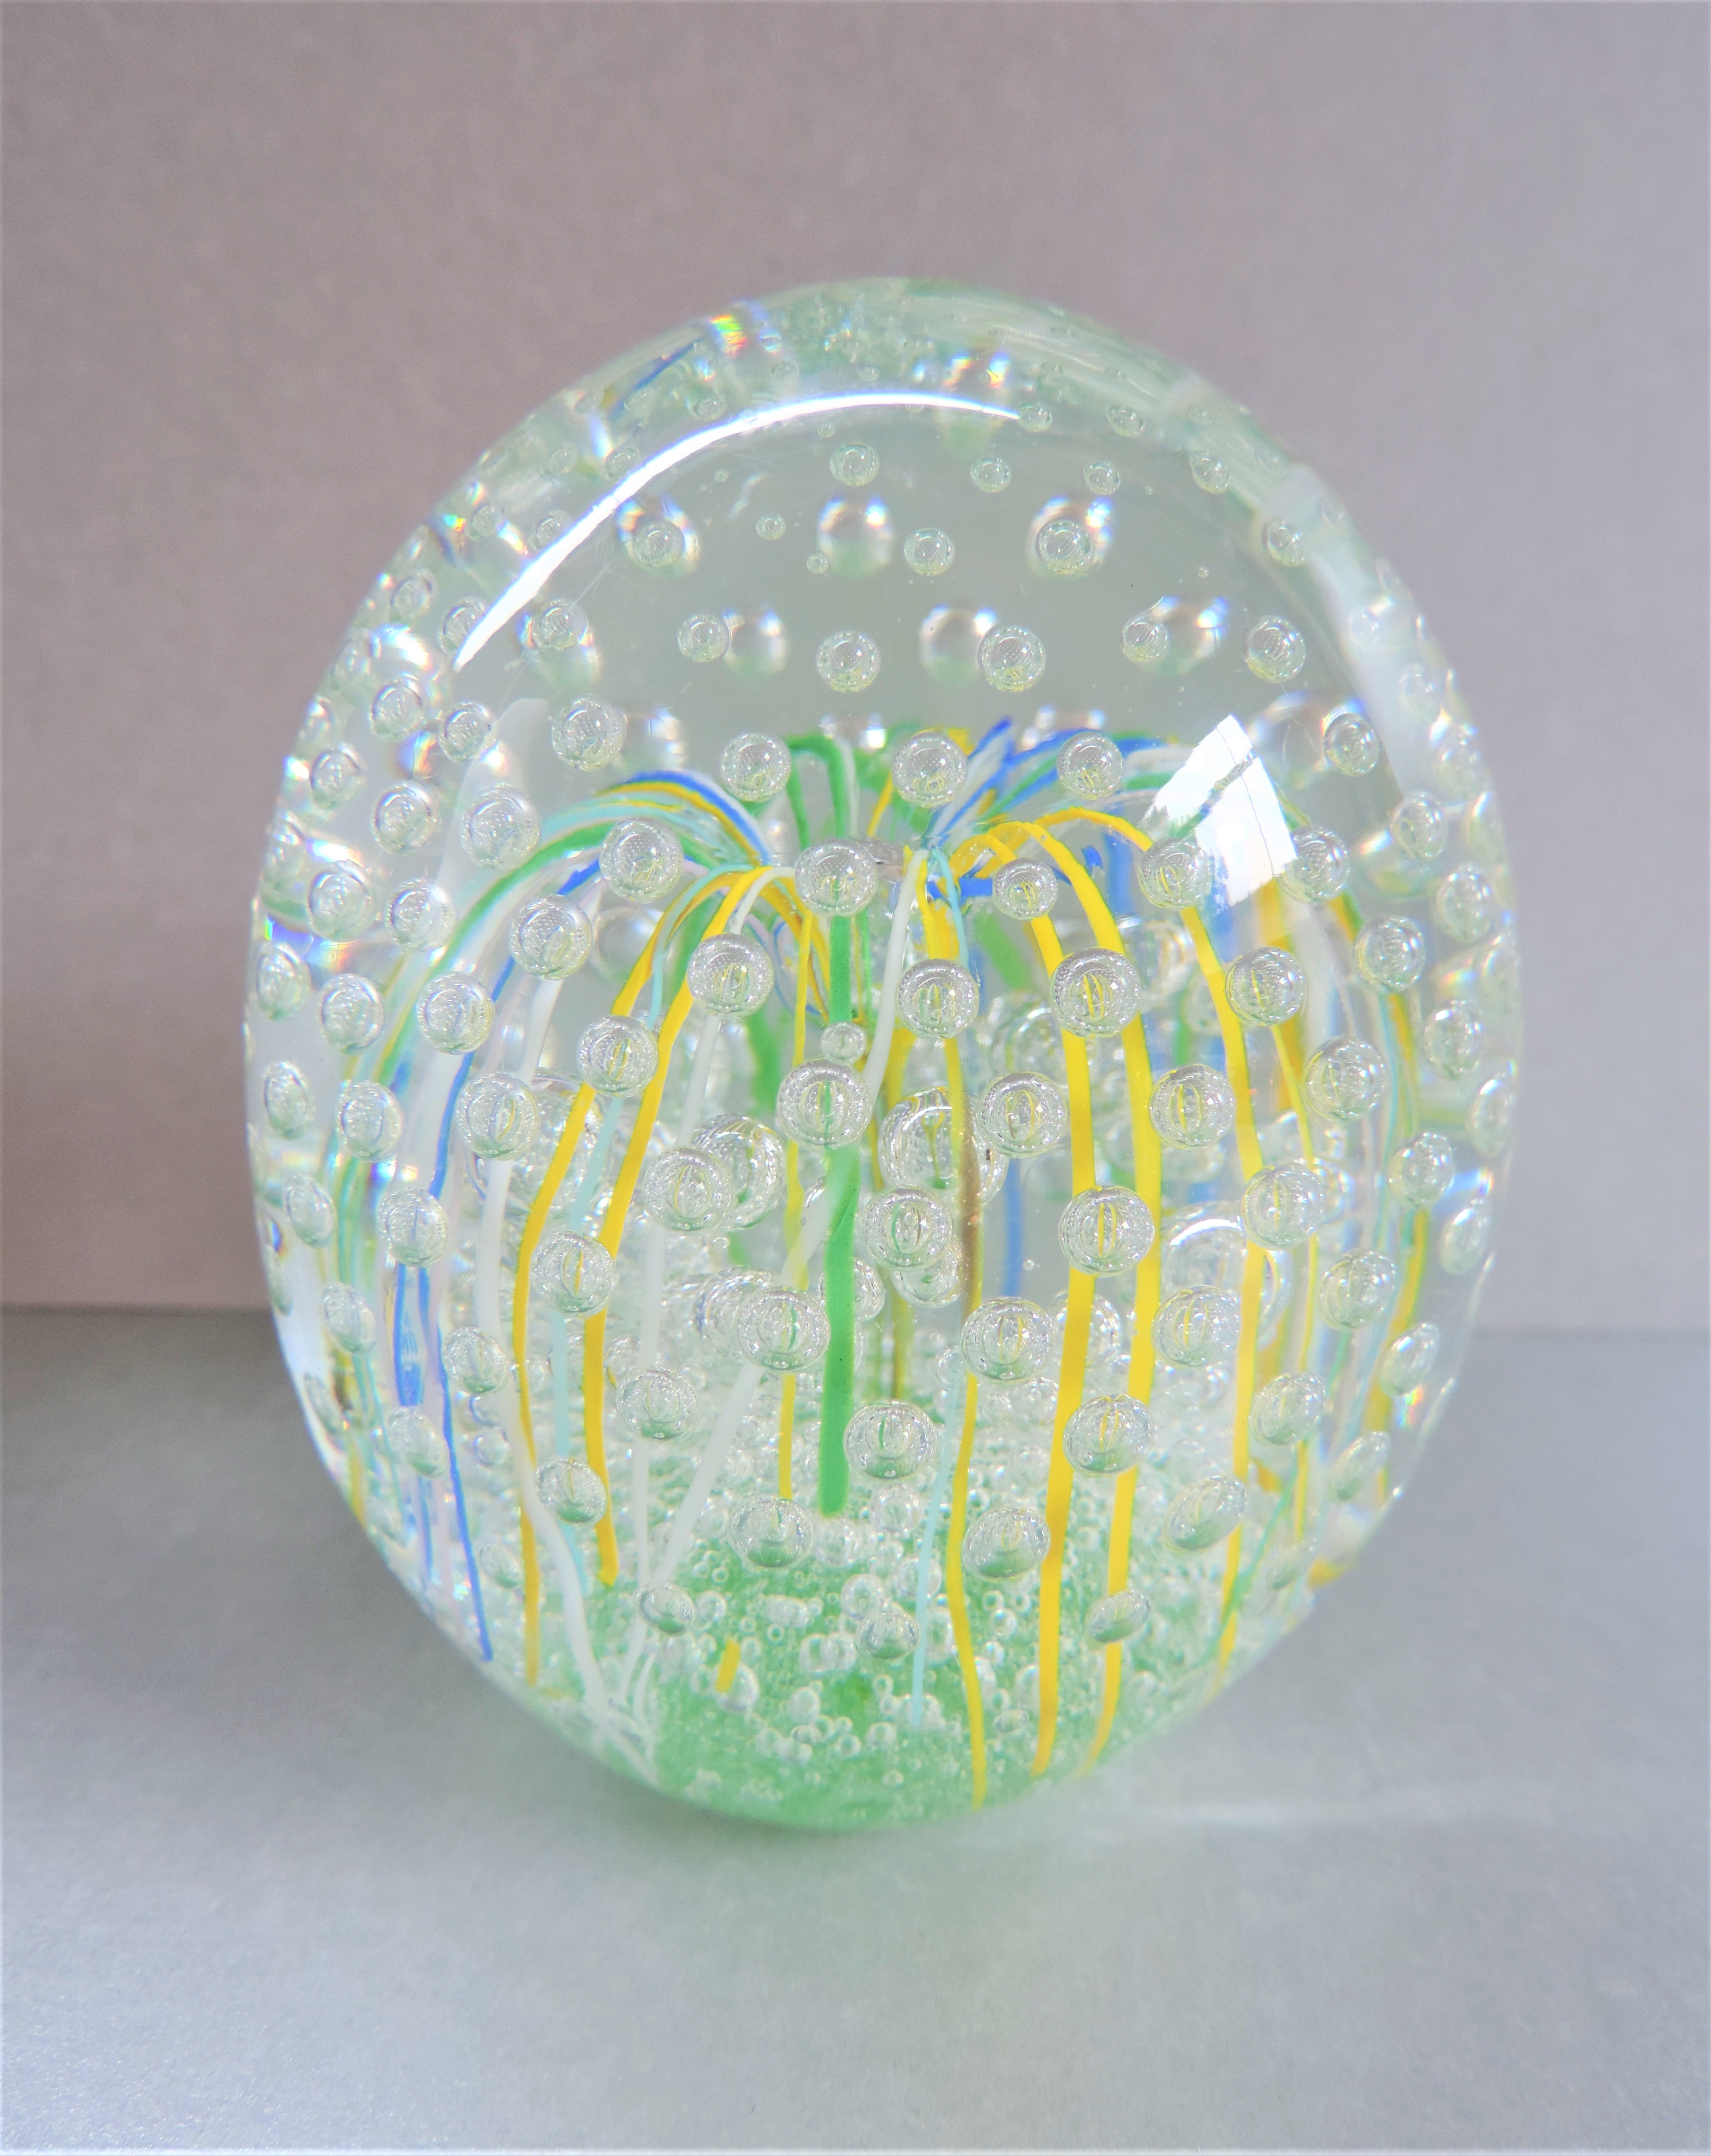 Art Glass Paperweight Bubbles & Fireworks - Image 3 of 4